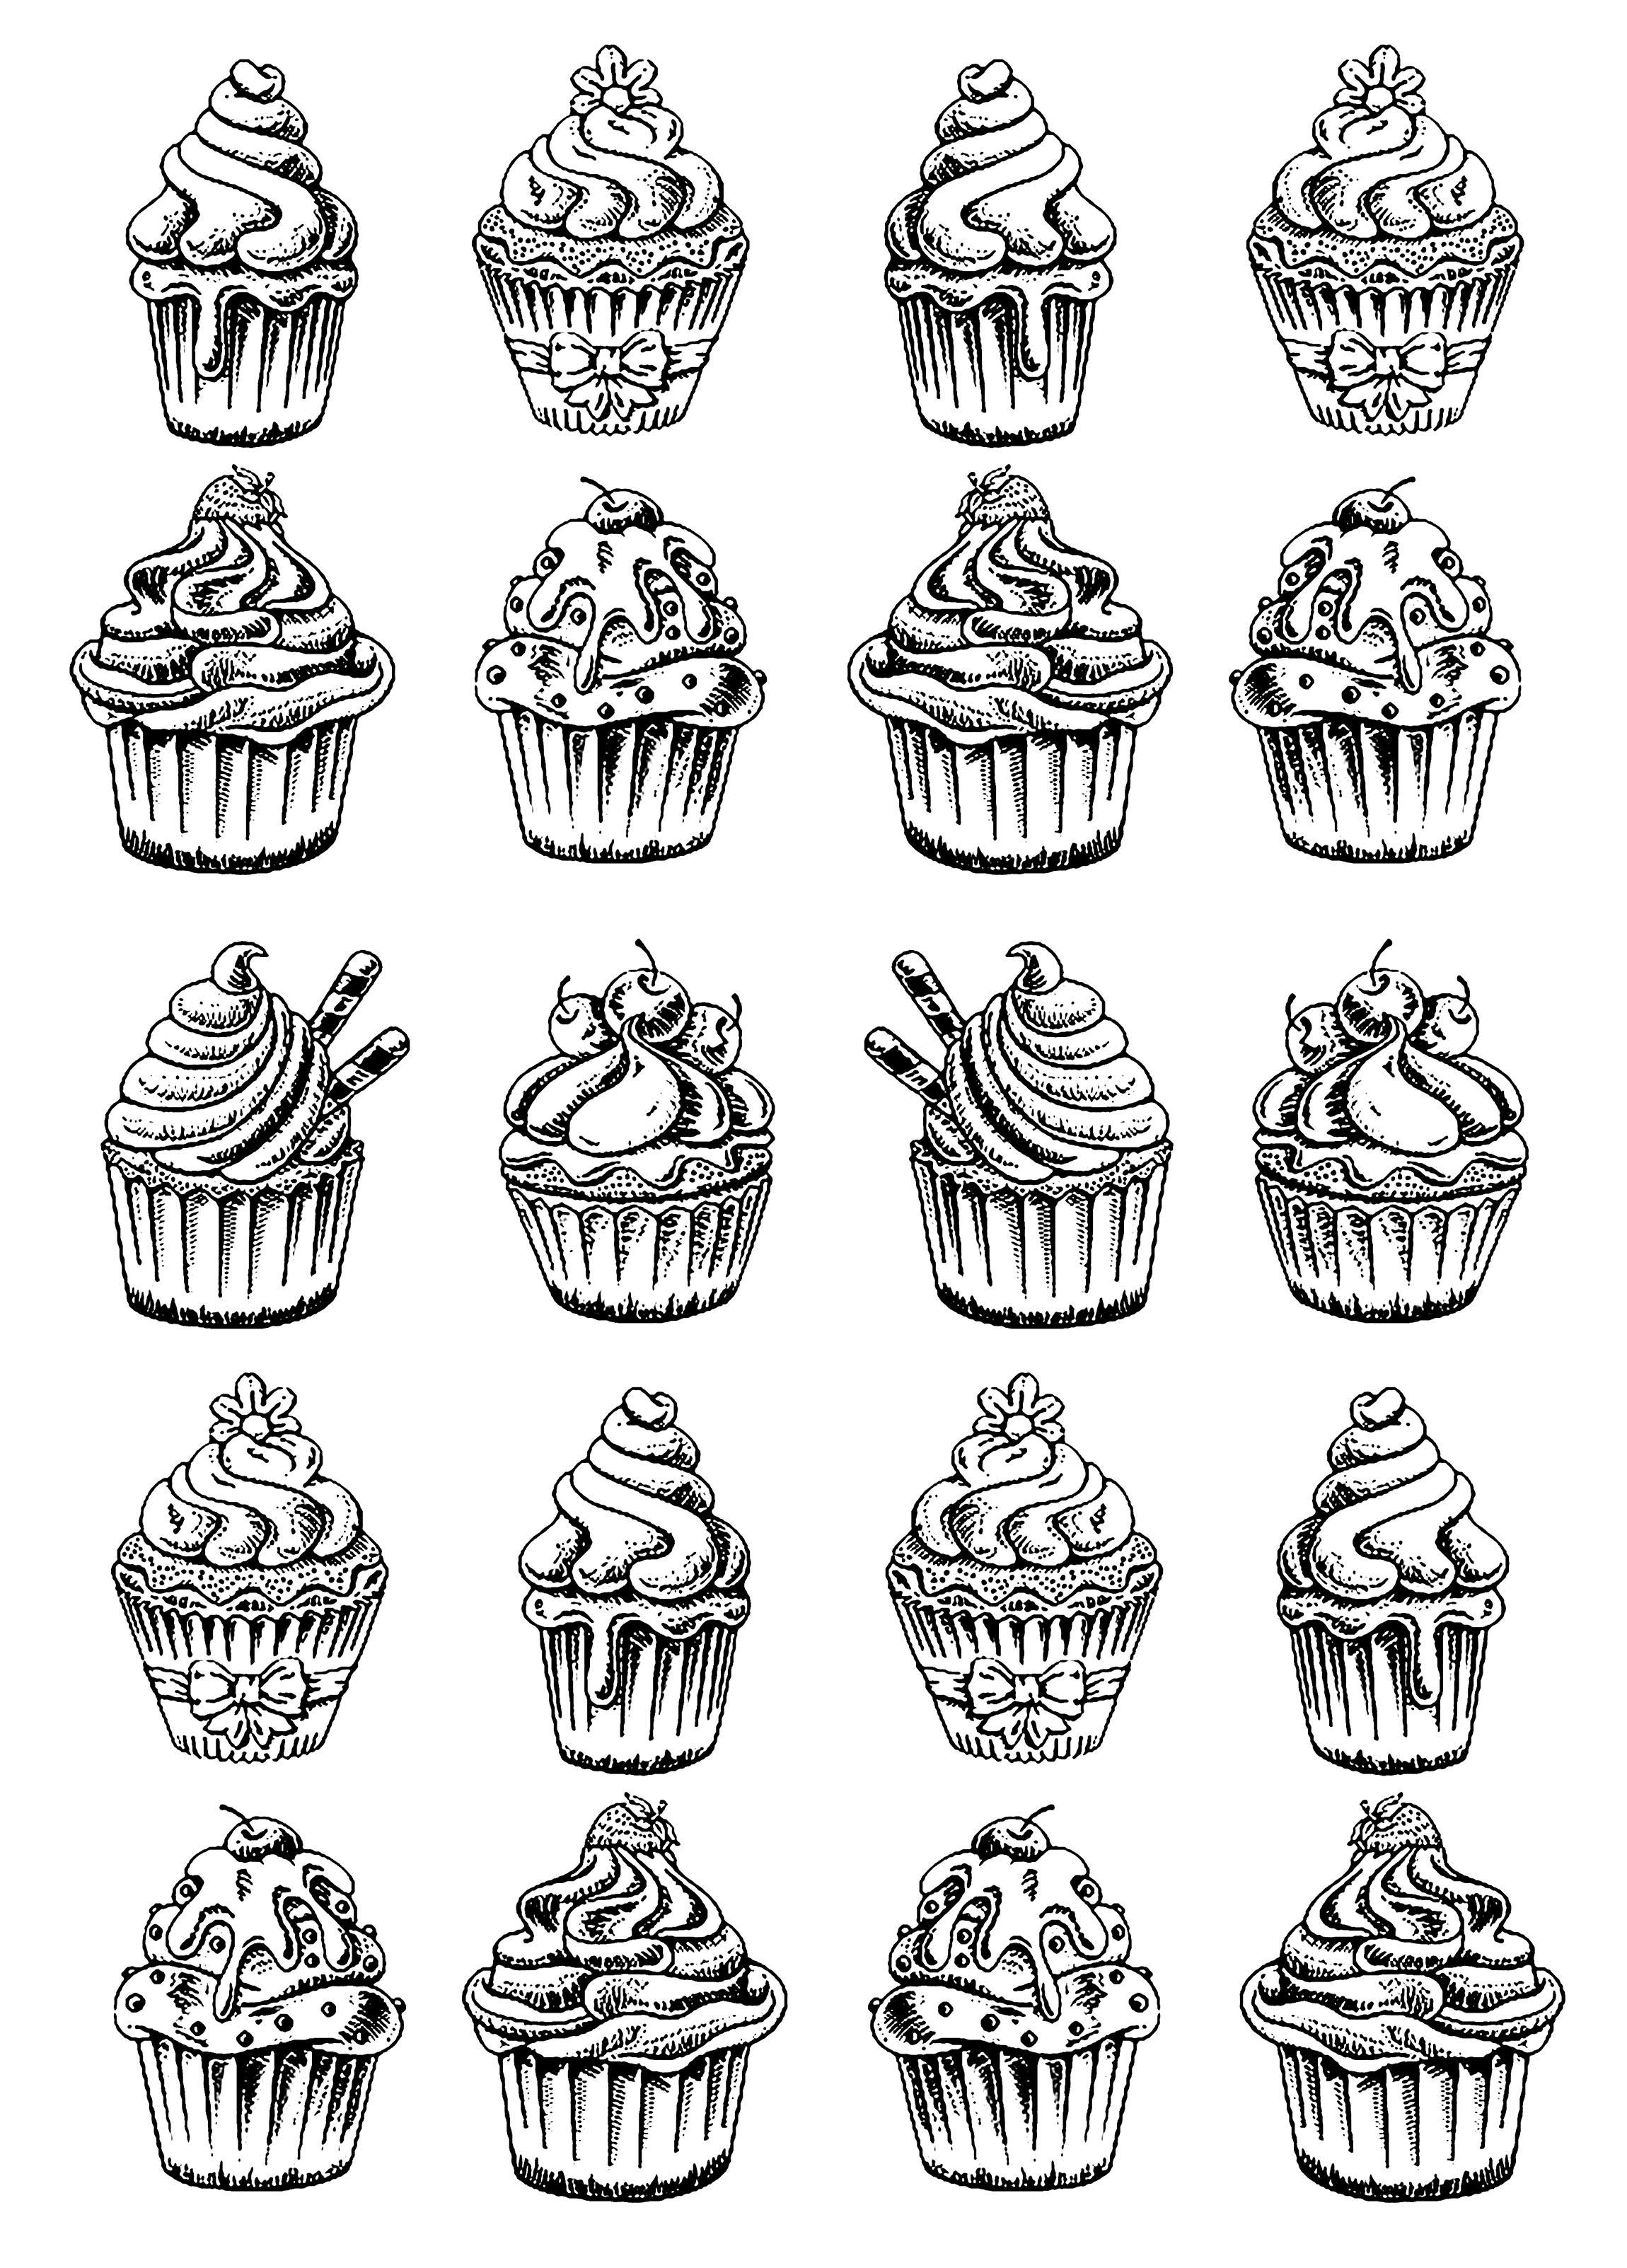 Cup cakes 70